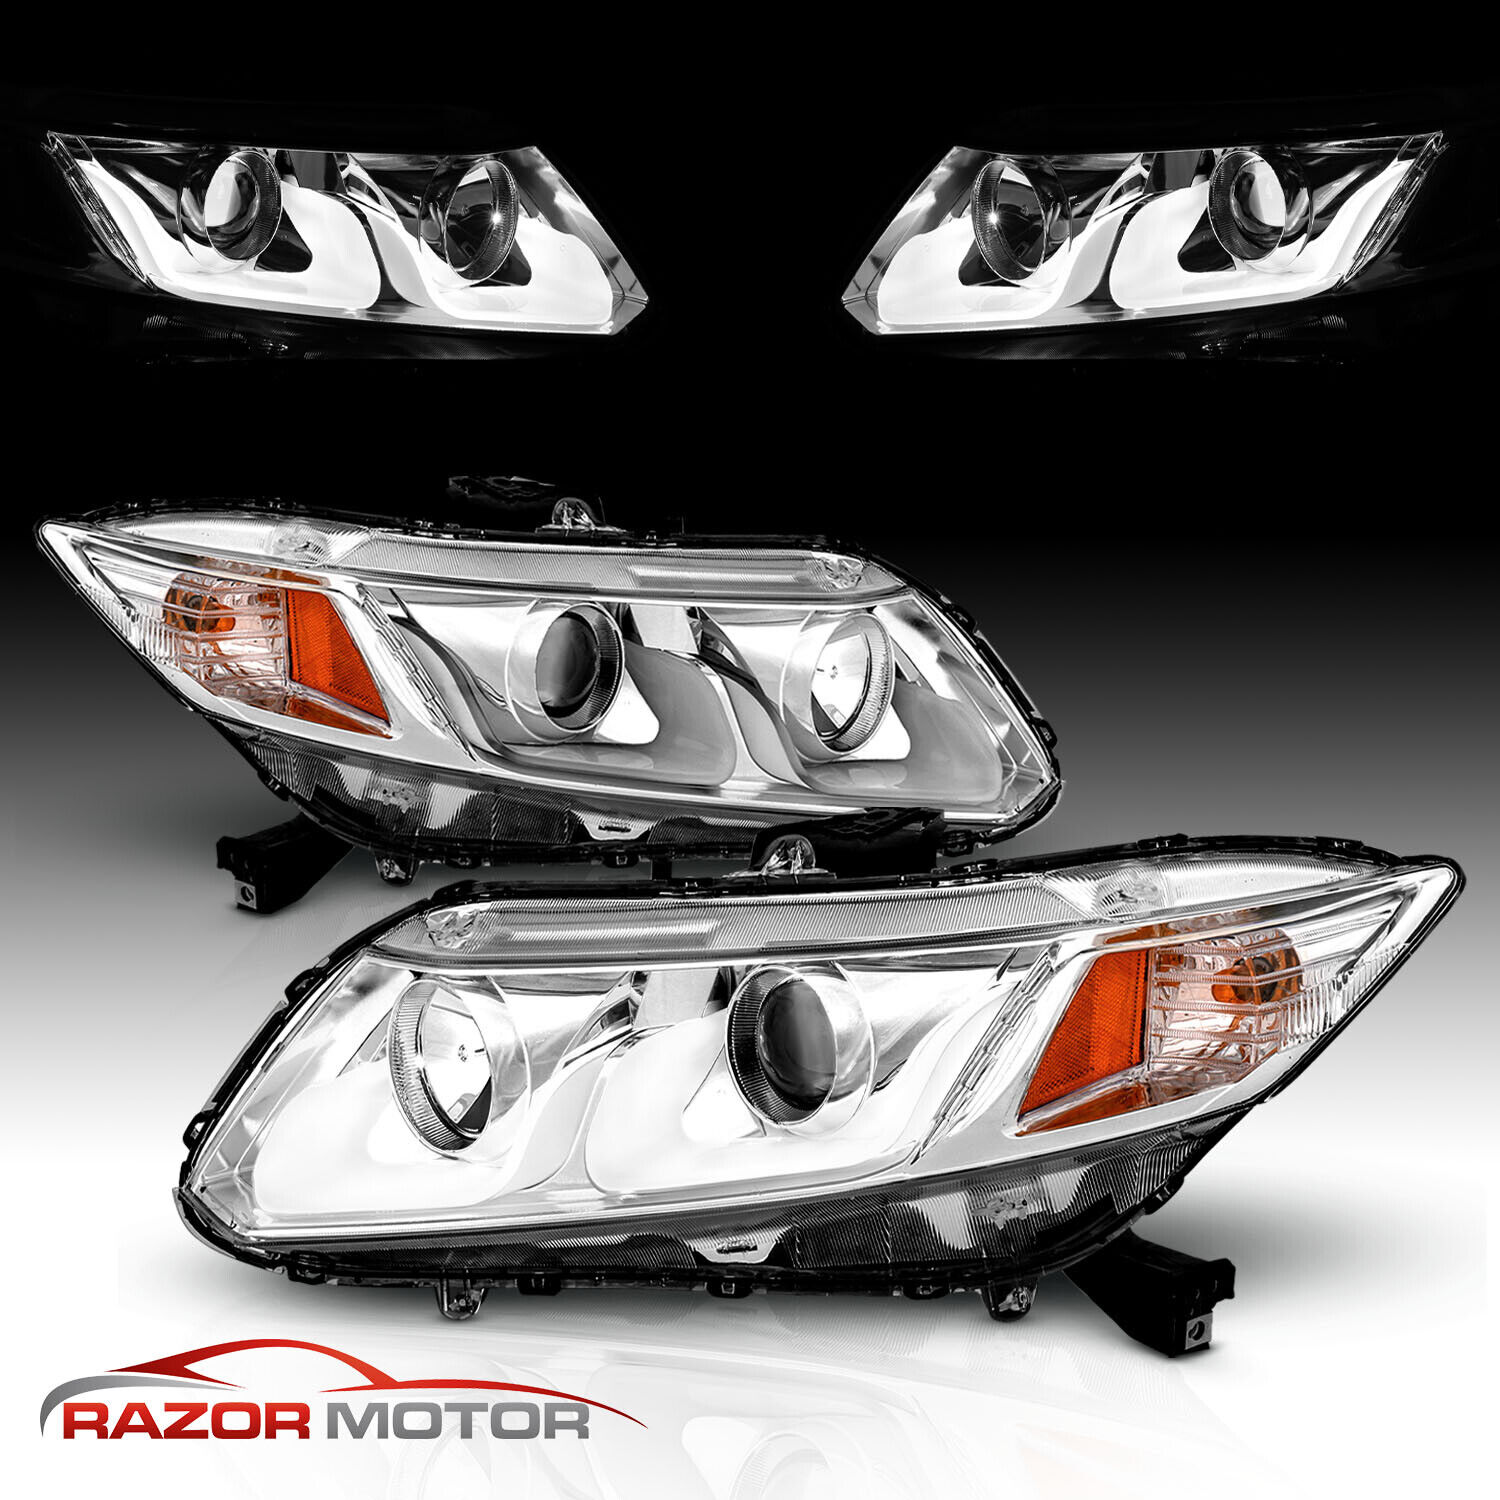 [U Style LED]For 2012 2013 2014 2015 Honda Civic 2/4Dr Projector Headlights Pair